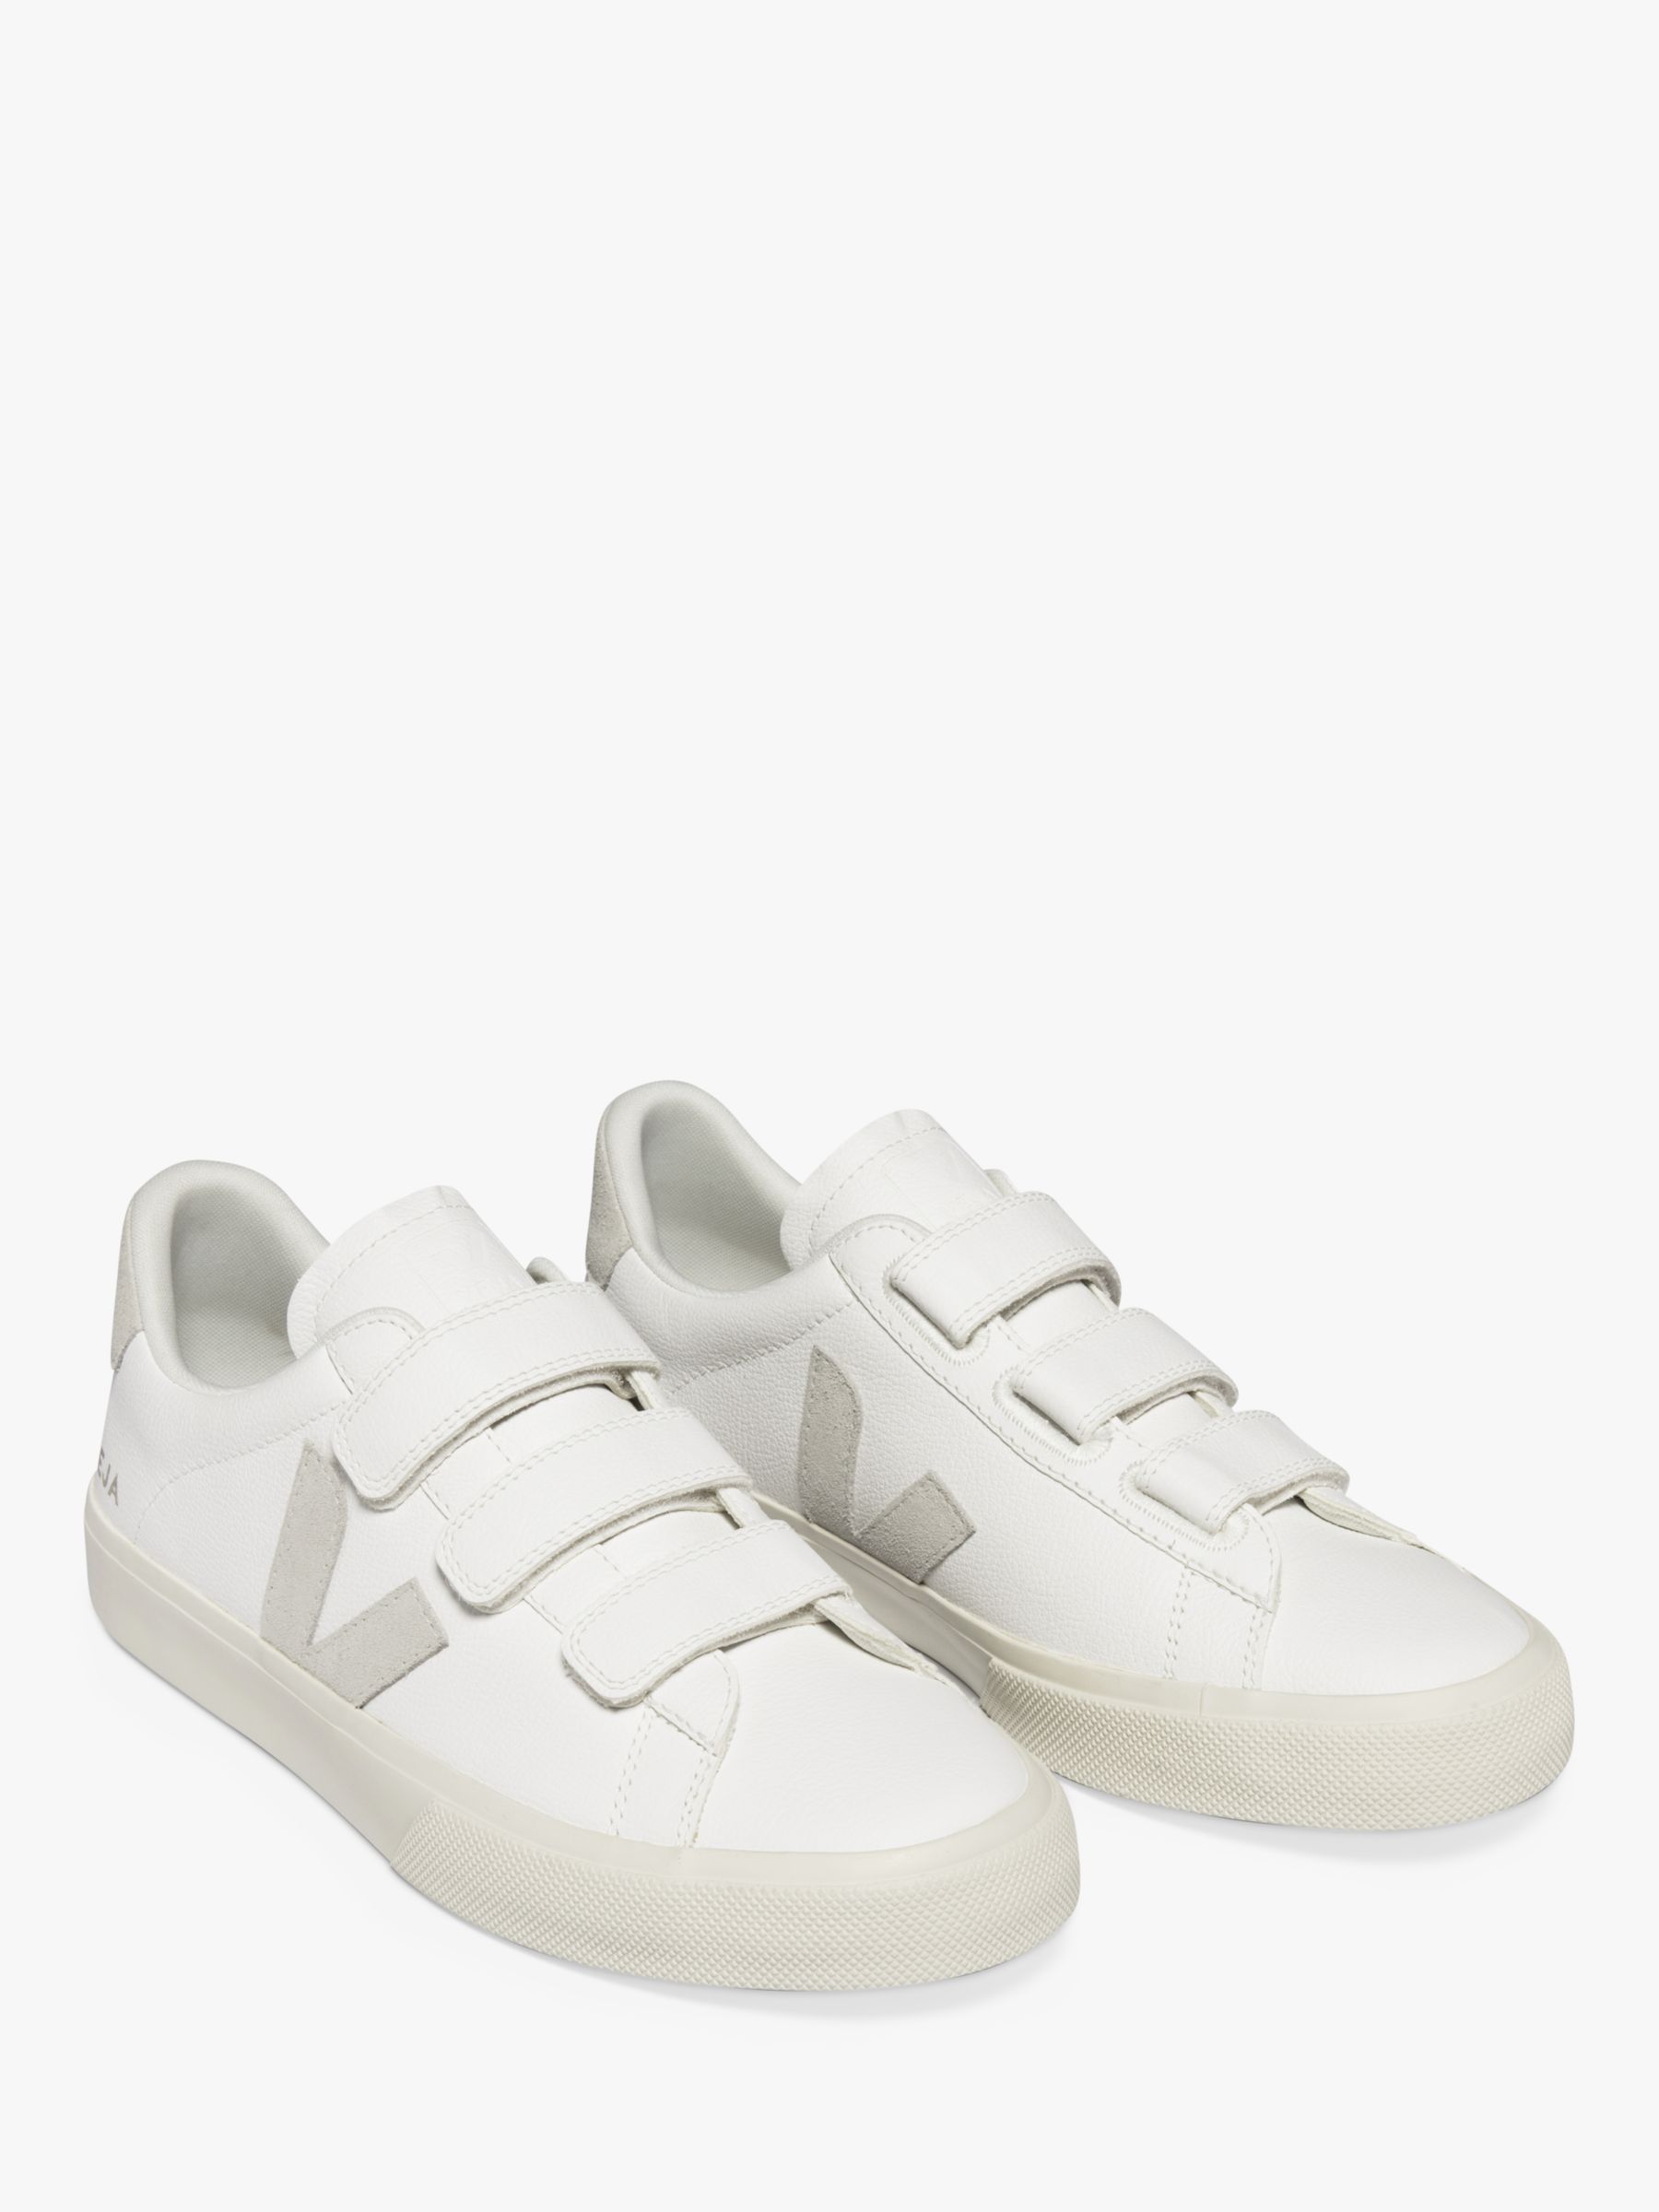 VEJA Recife Leather Trainers, Extra White/Natural, 4